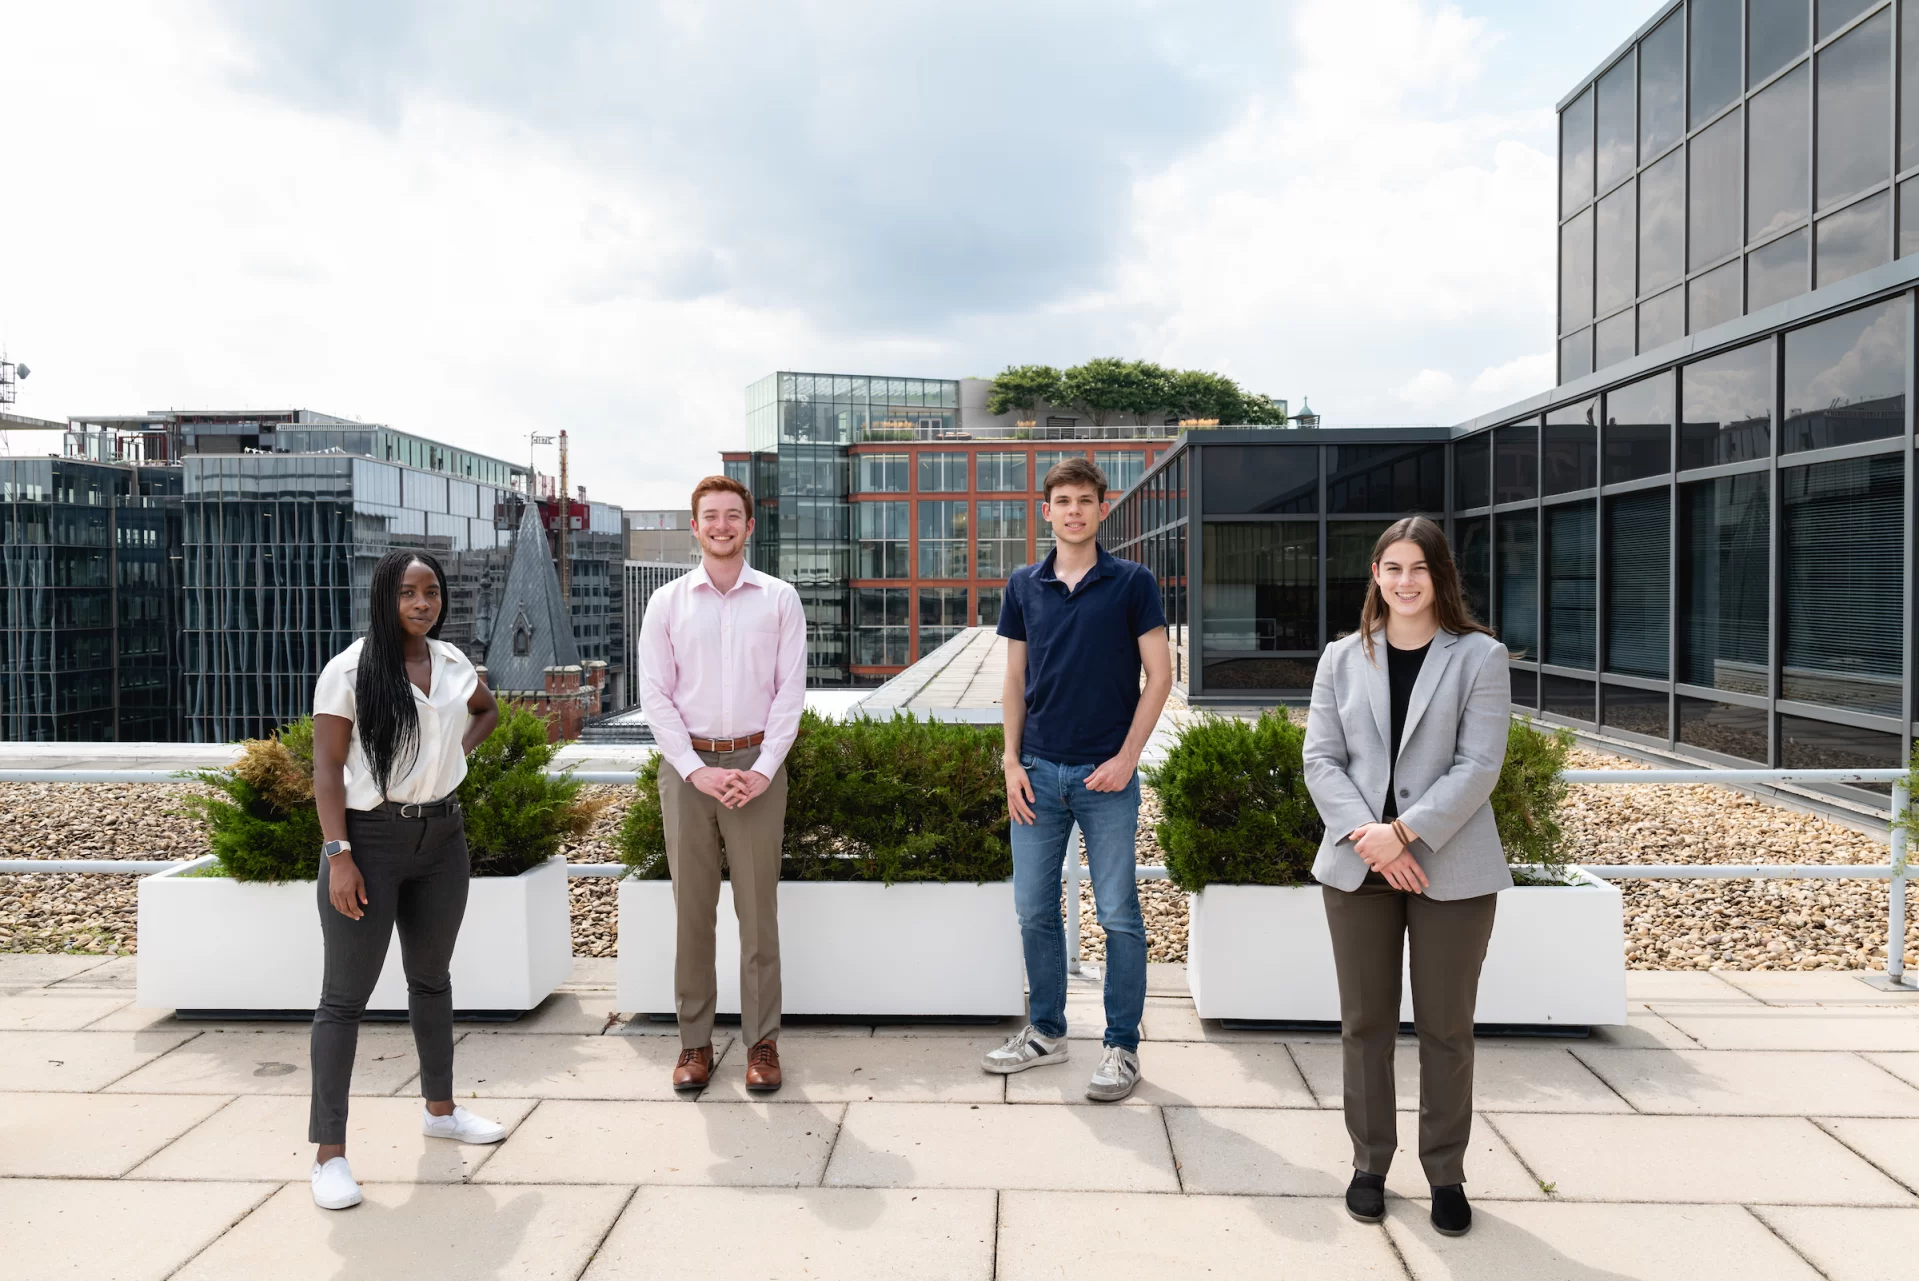 Bates College, class of '24 students: Aaliyah Moore, Jack Lawrence, Perry Beckett, and Emma Rippey, pose for a portrait on the rooftop at their summer internship, at Kellogg Hansen law firm in Washington, D.C., pose for a portrait, on Wednesday, July 19, 2023. Photo by Cheriss May, Ndemay Media Group for Bates College.